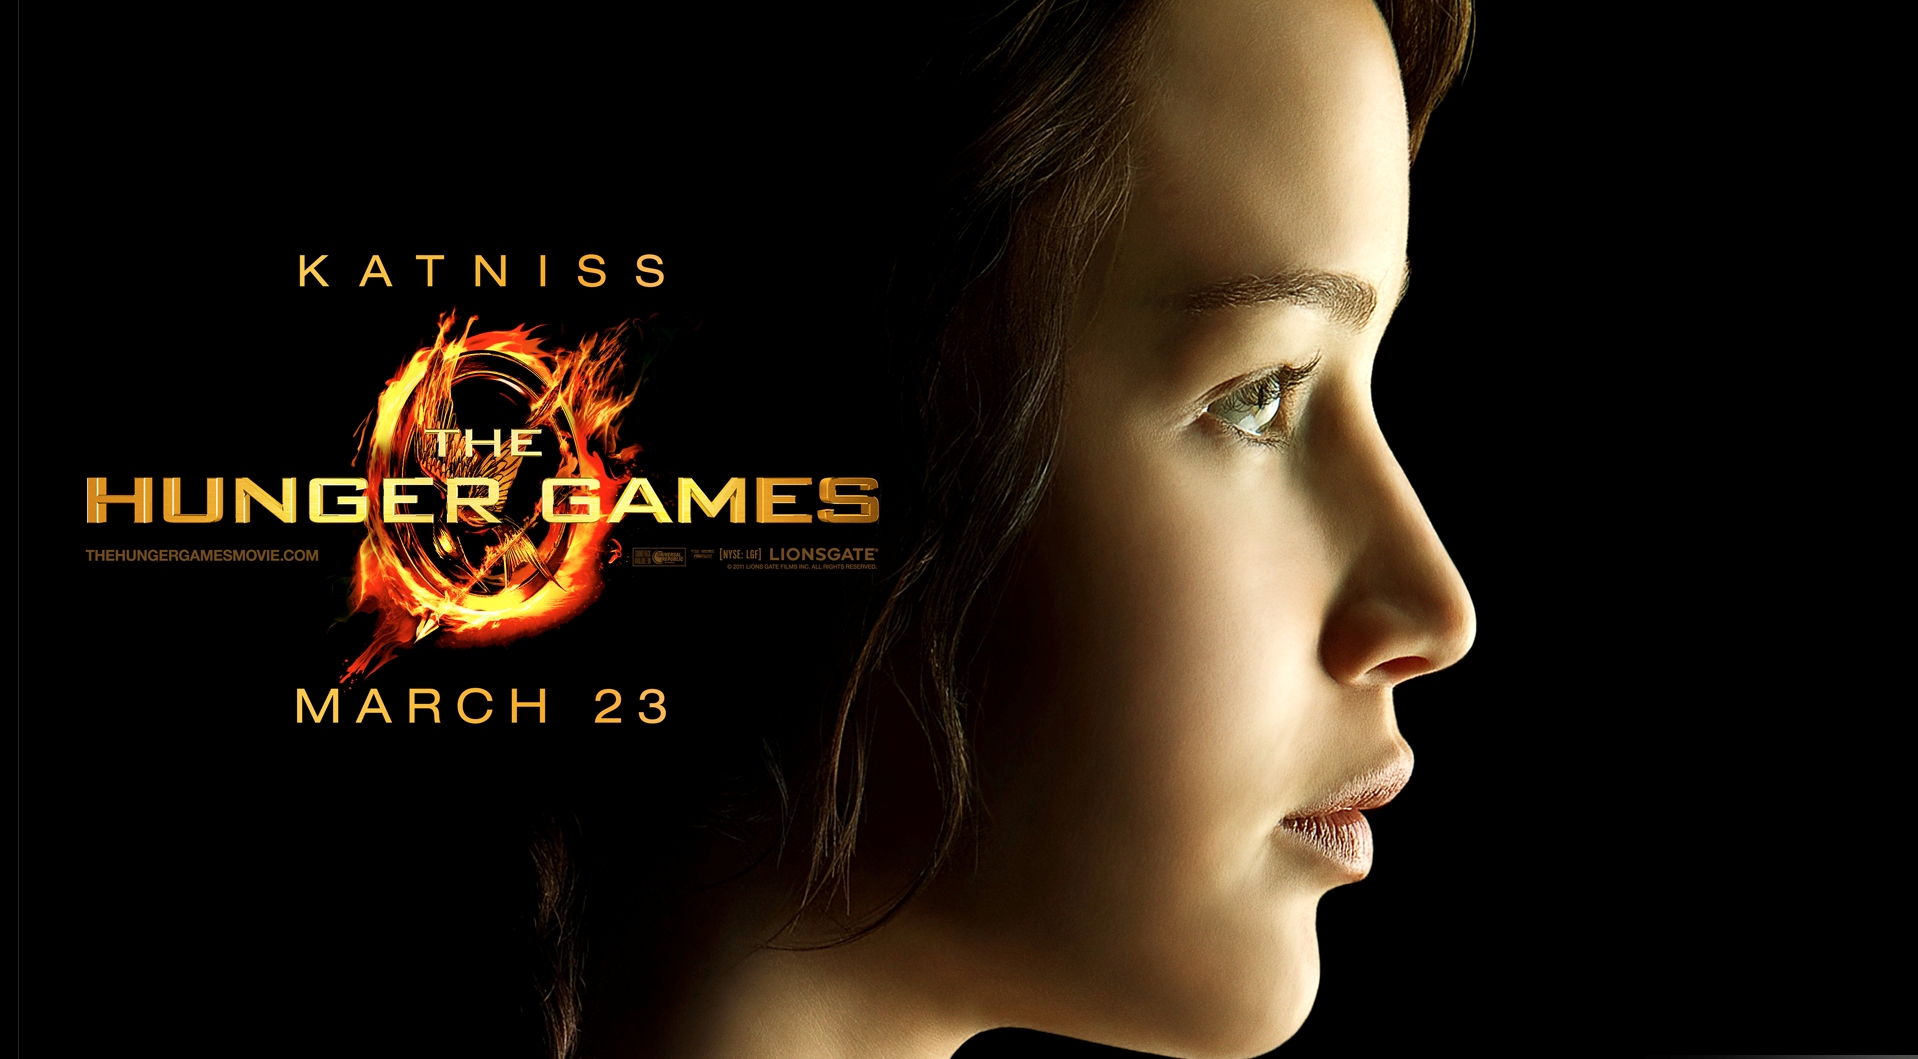 The Hunger Games Movie   1080p HD Wallpaper HD Wallpapers Source